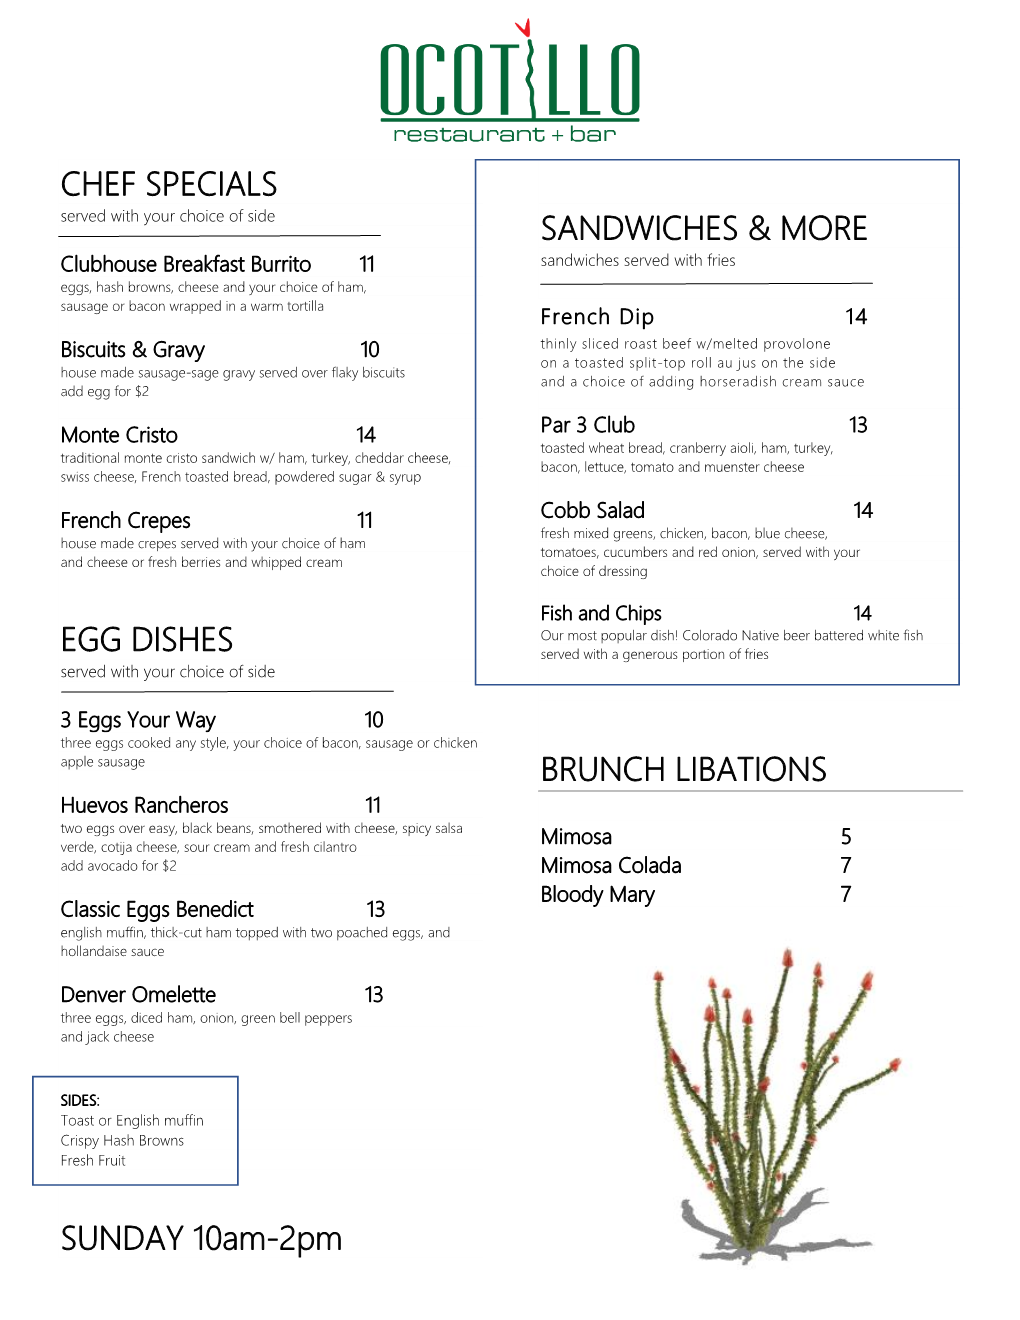 CHEF SPECIALS EGG DISHES SUNDAY 10Am-2Pm